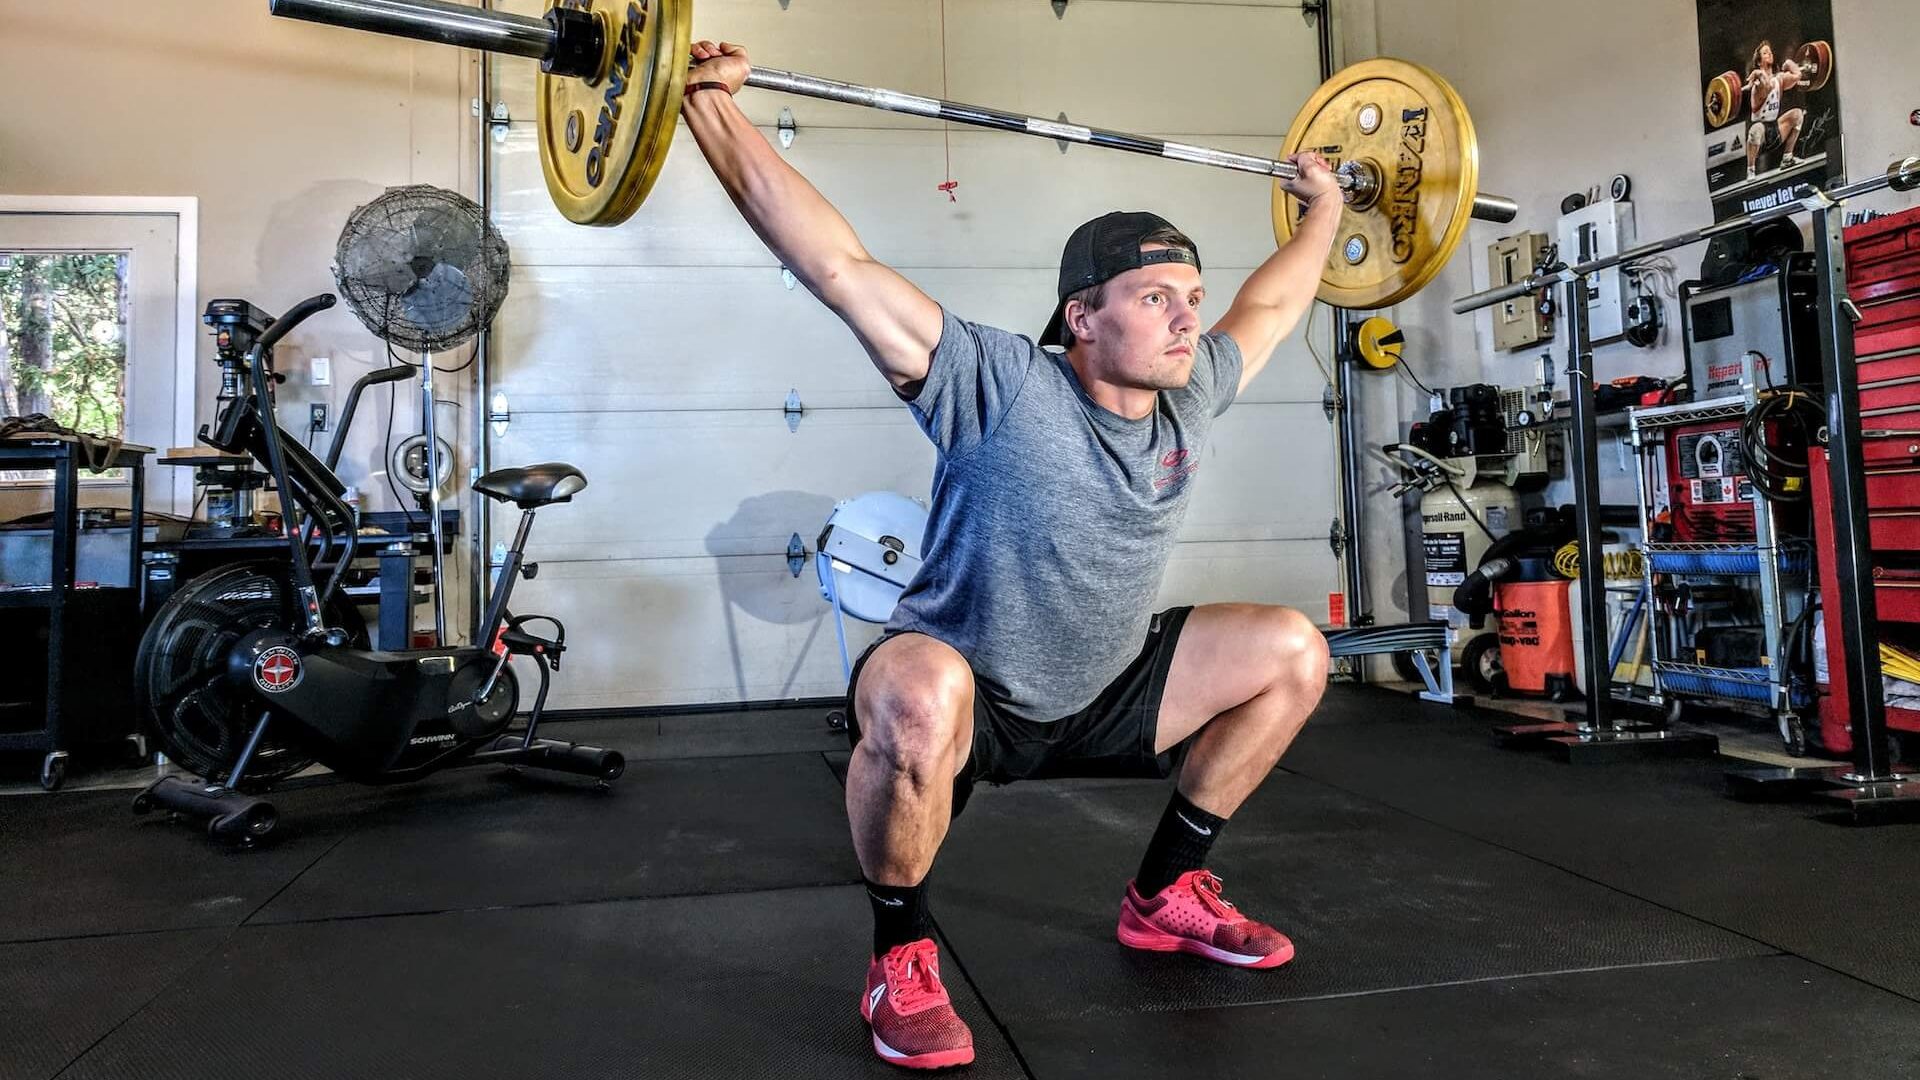 Alt text for an image of an athlete performing a snatch, an Olympic weightlifting movement.